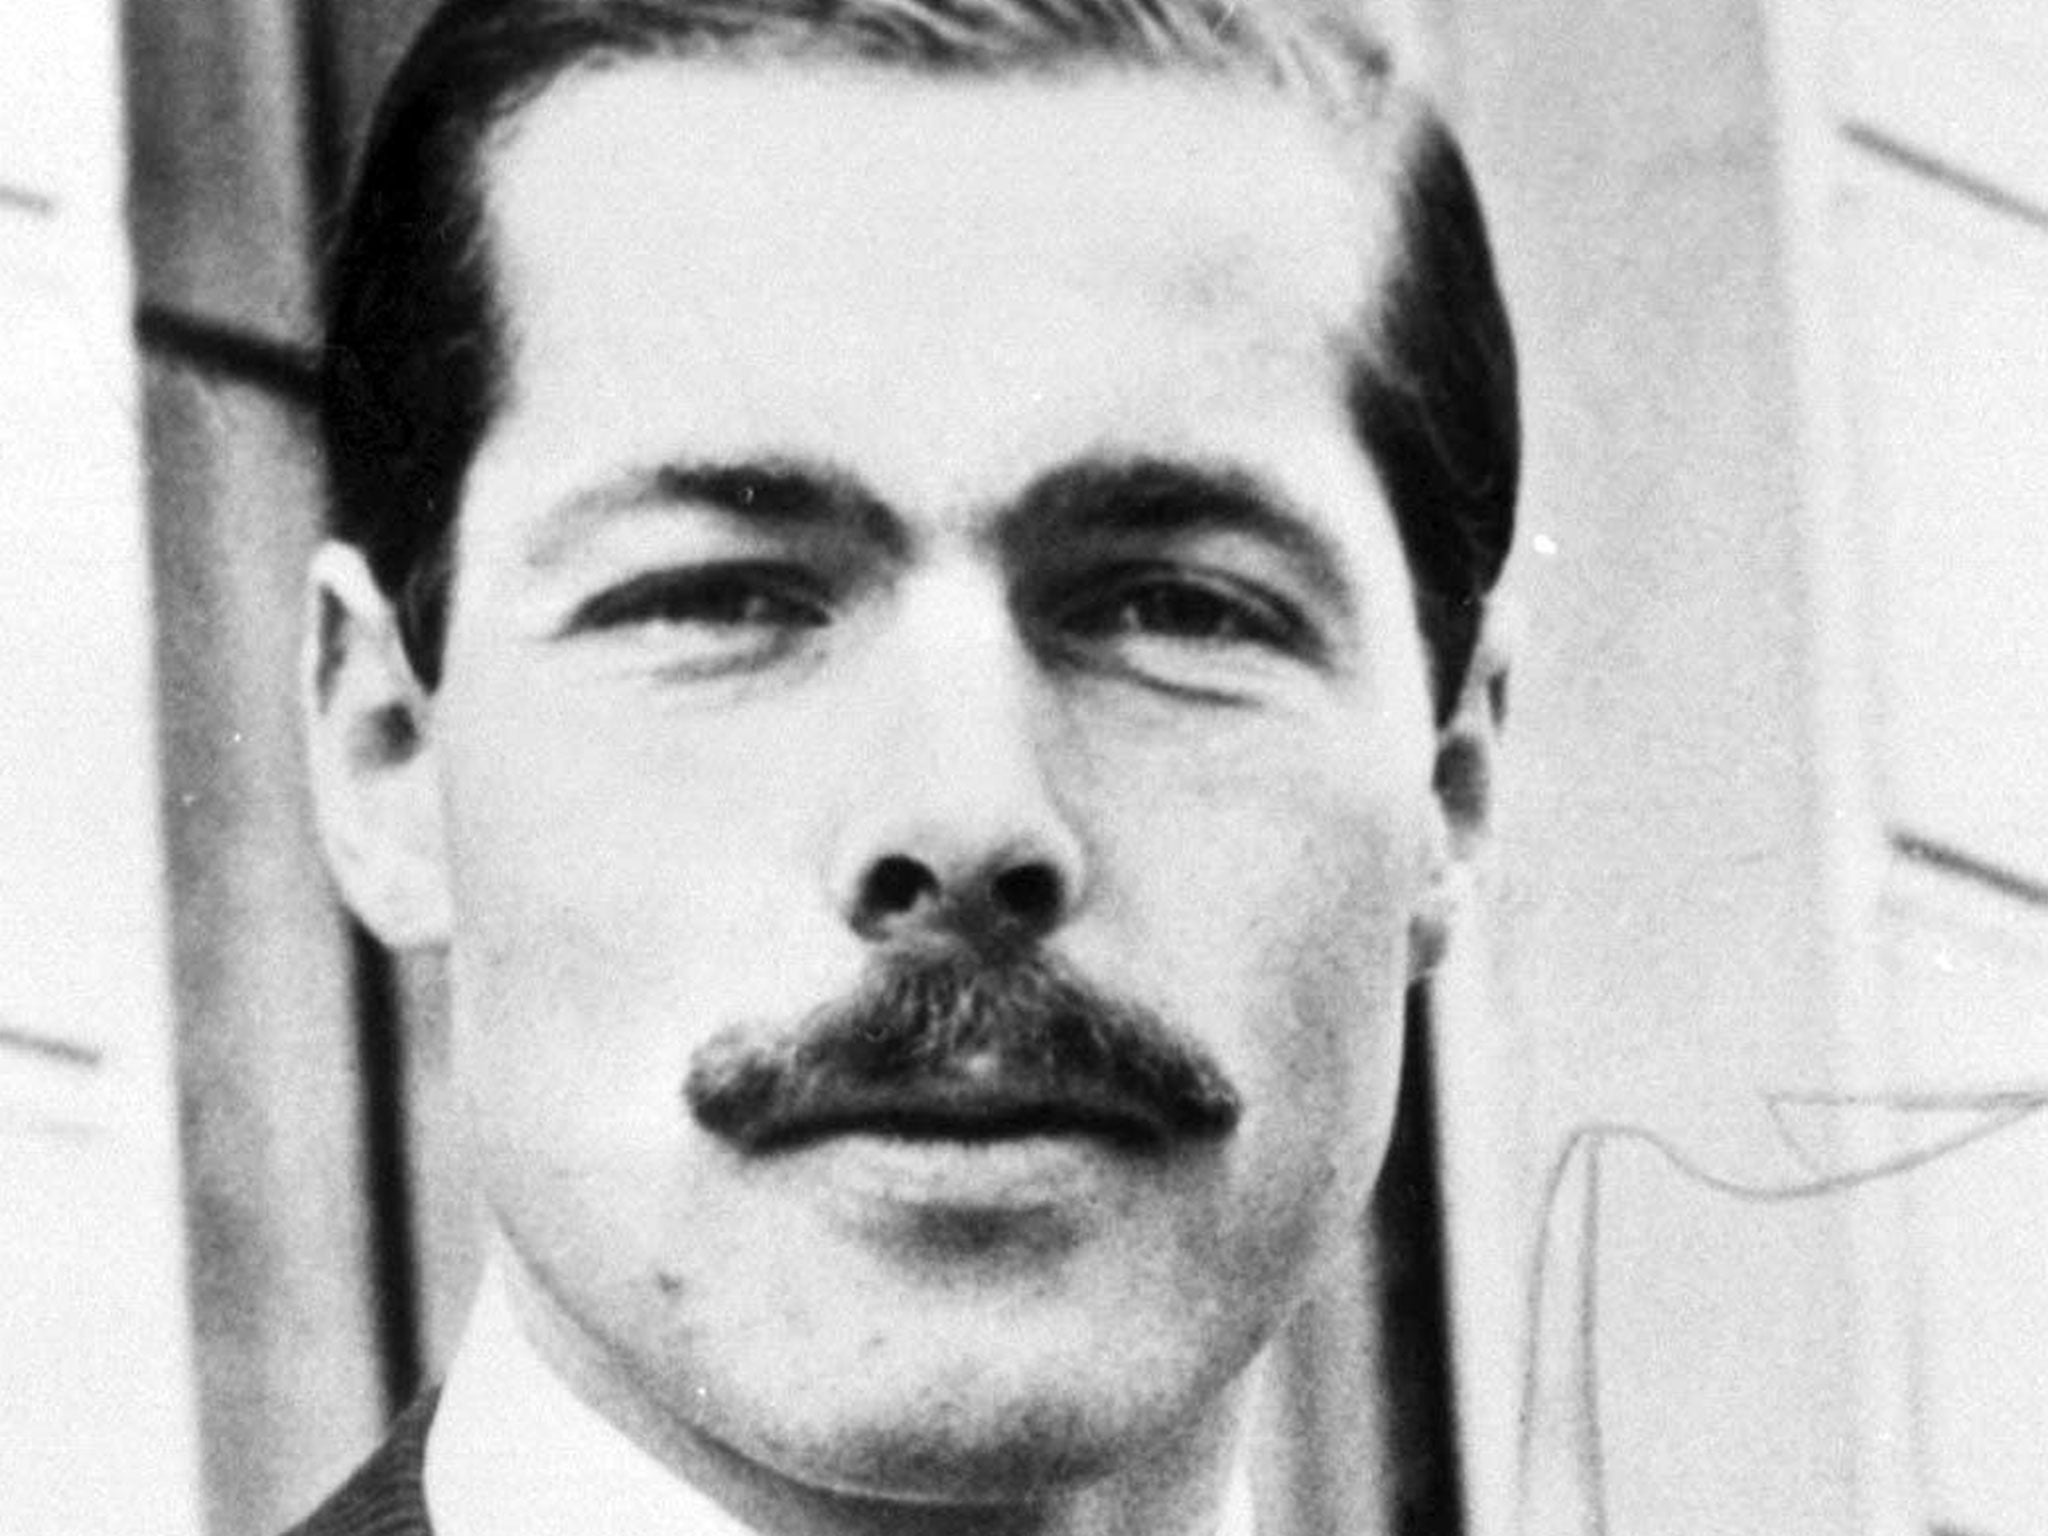 Lord Lucan drowned himself after accidentally killing family nanny The Independent The Independent picture